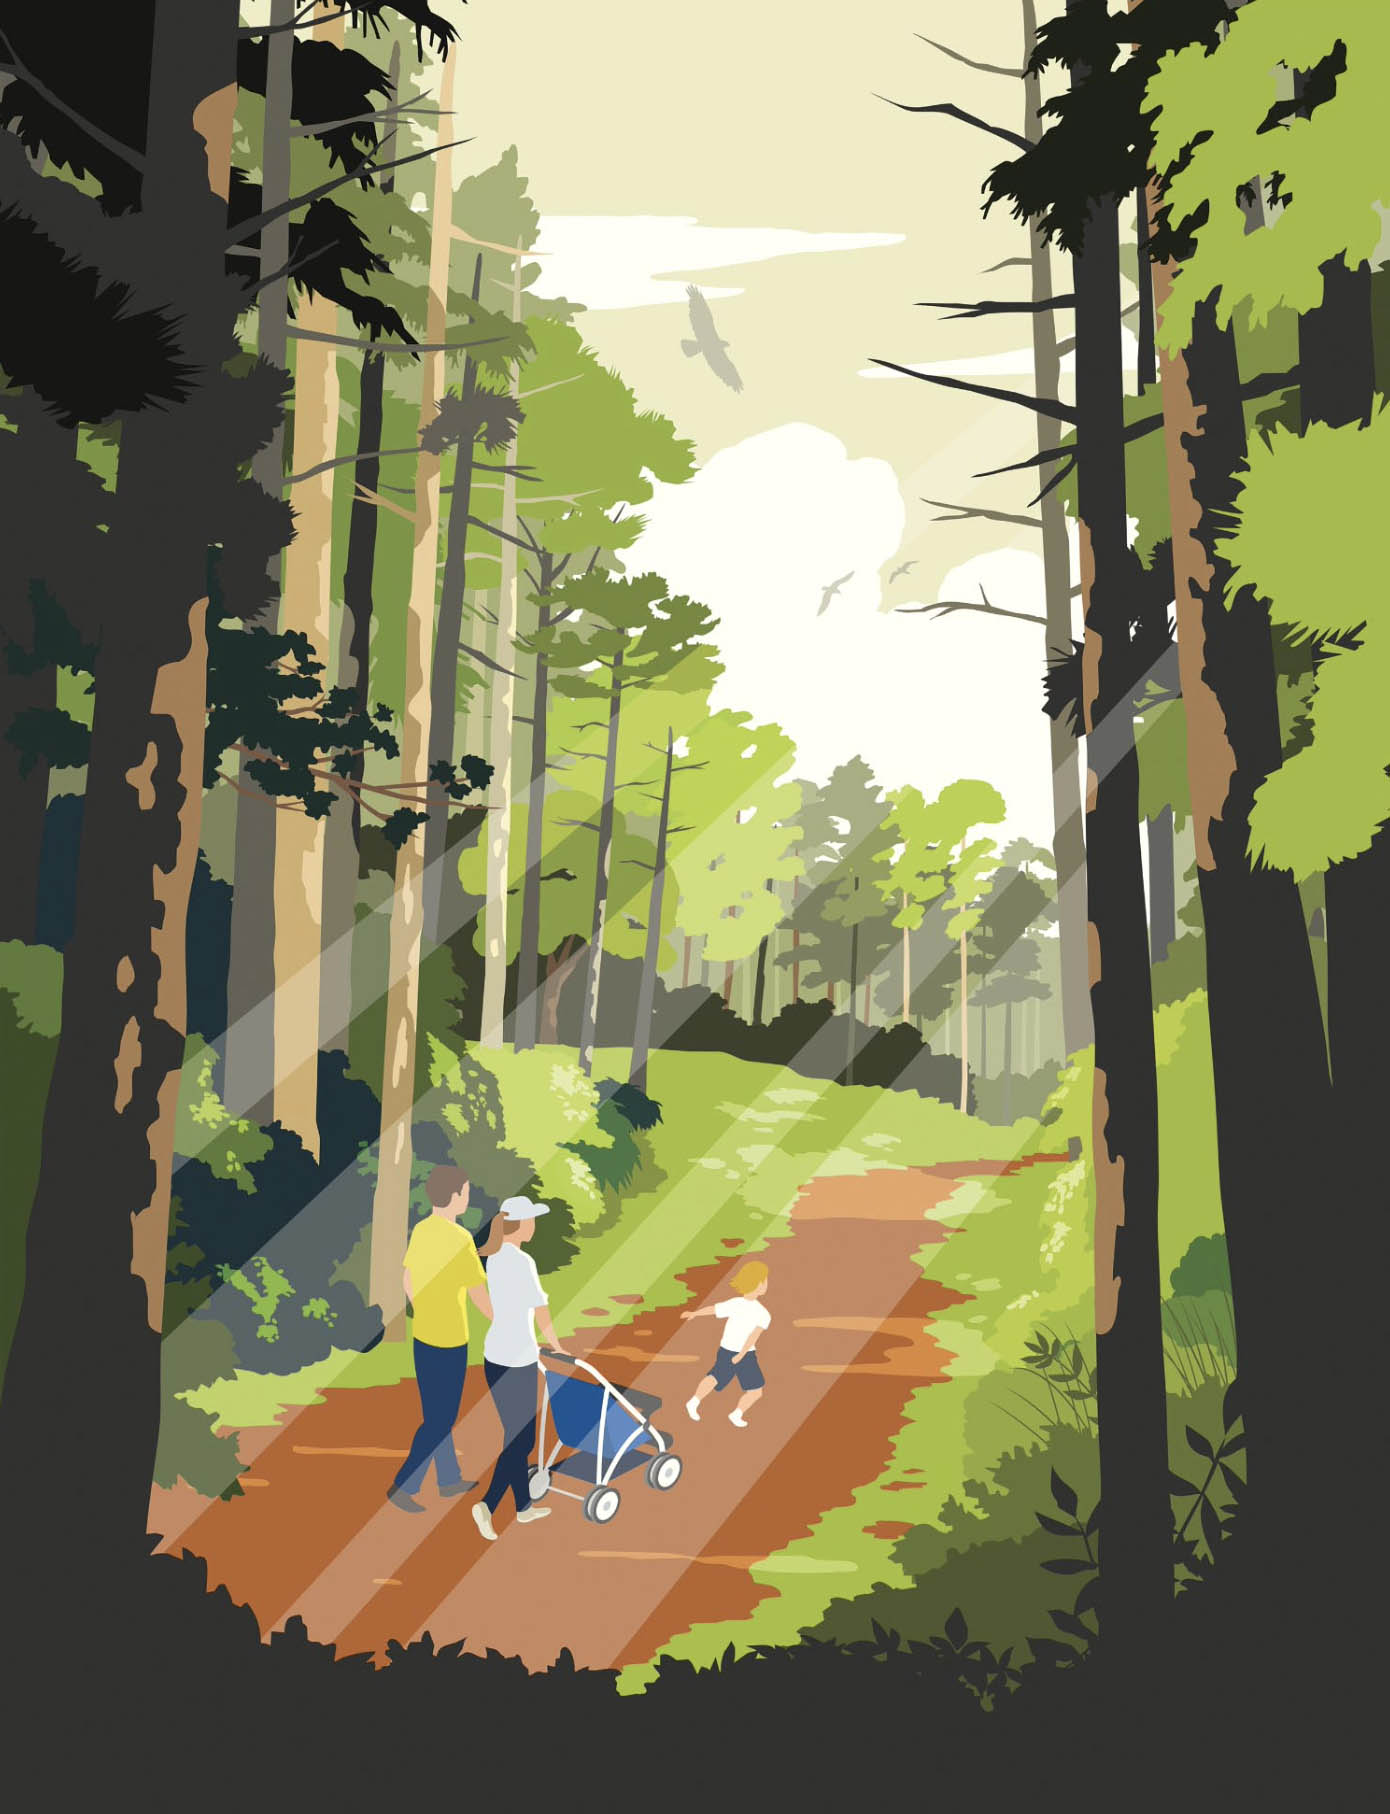 An illustration showing a man and woman pushing a blue stroller while a young child runs ahead in a forest of tall green trees